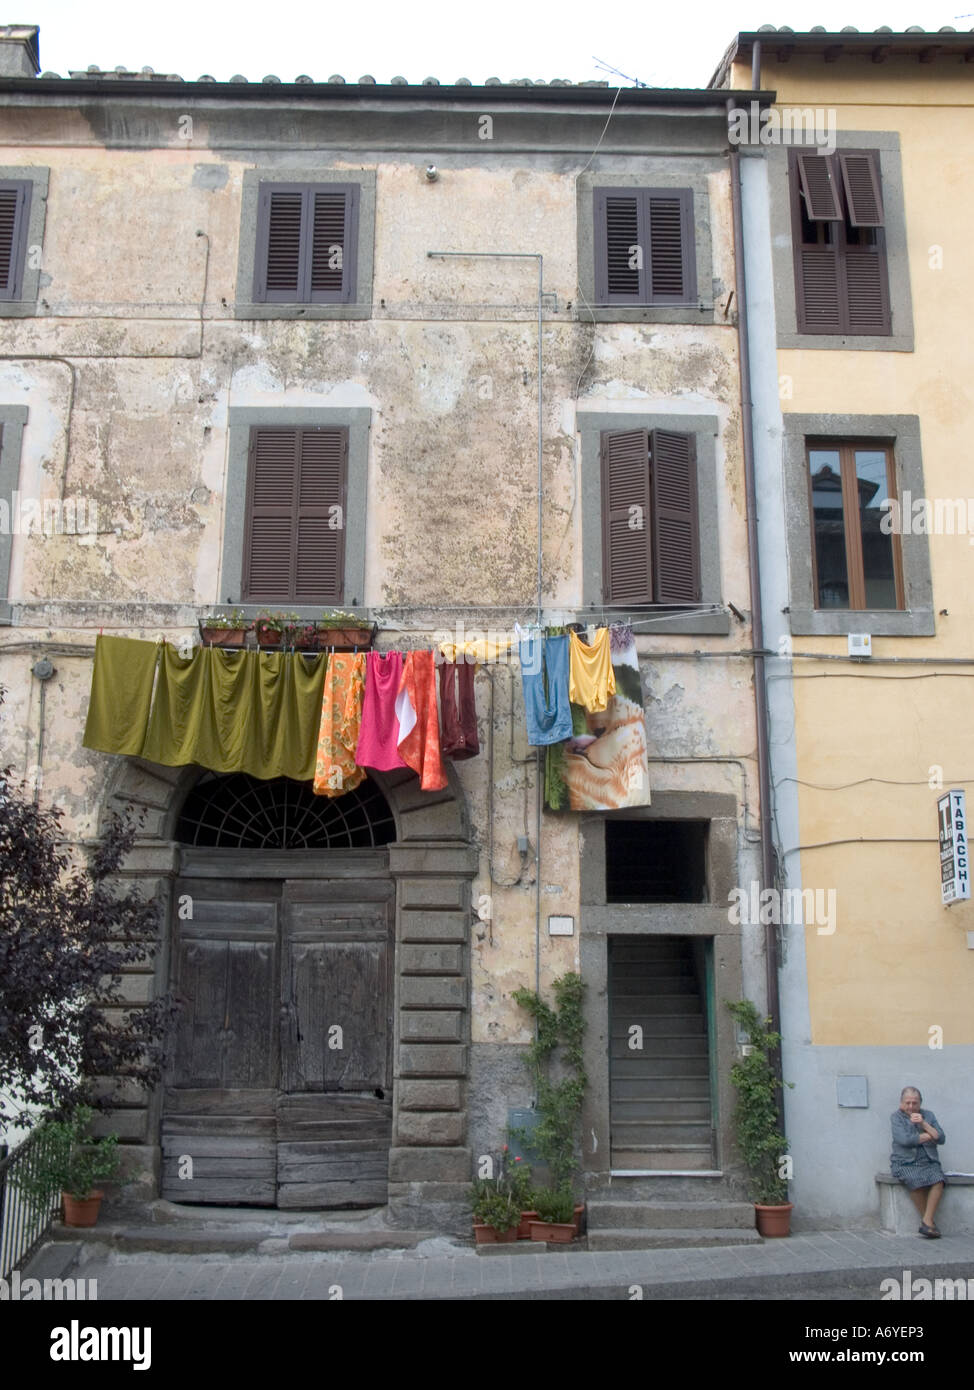 A woman sits outside passing the time of day as washing dries from a balcony in St Martino Al Cimino, Italy Stock Photo